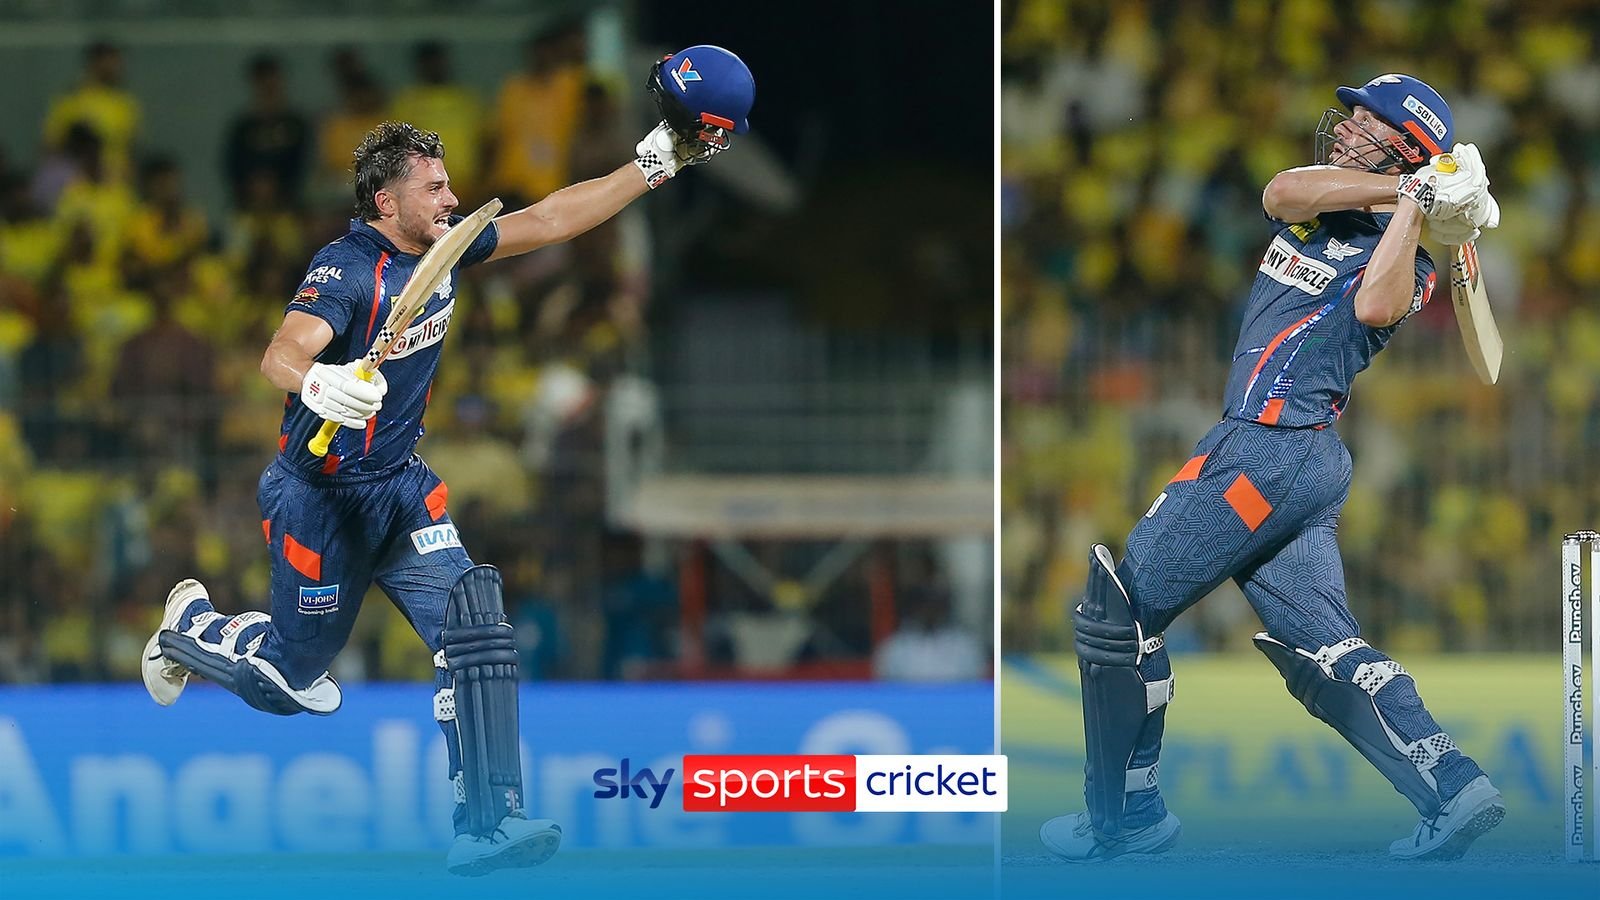 'He's in a hurry!' | Stoinis' 124 powers Lucknow to record chase win